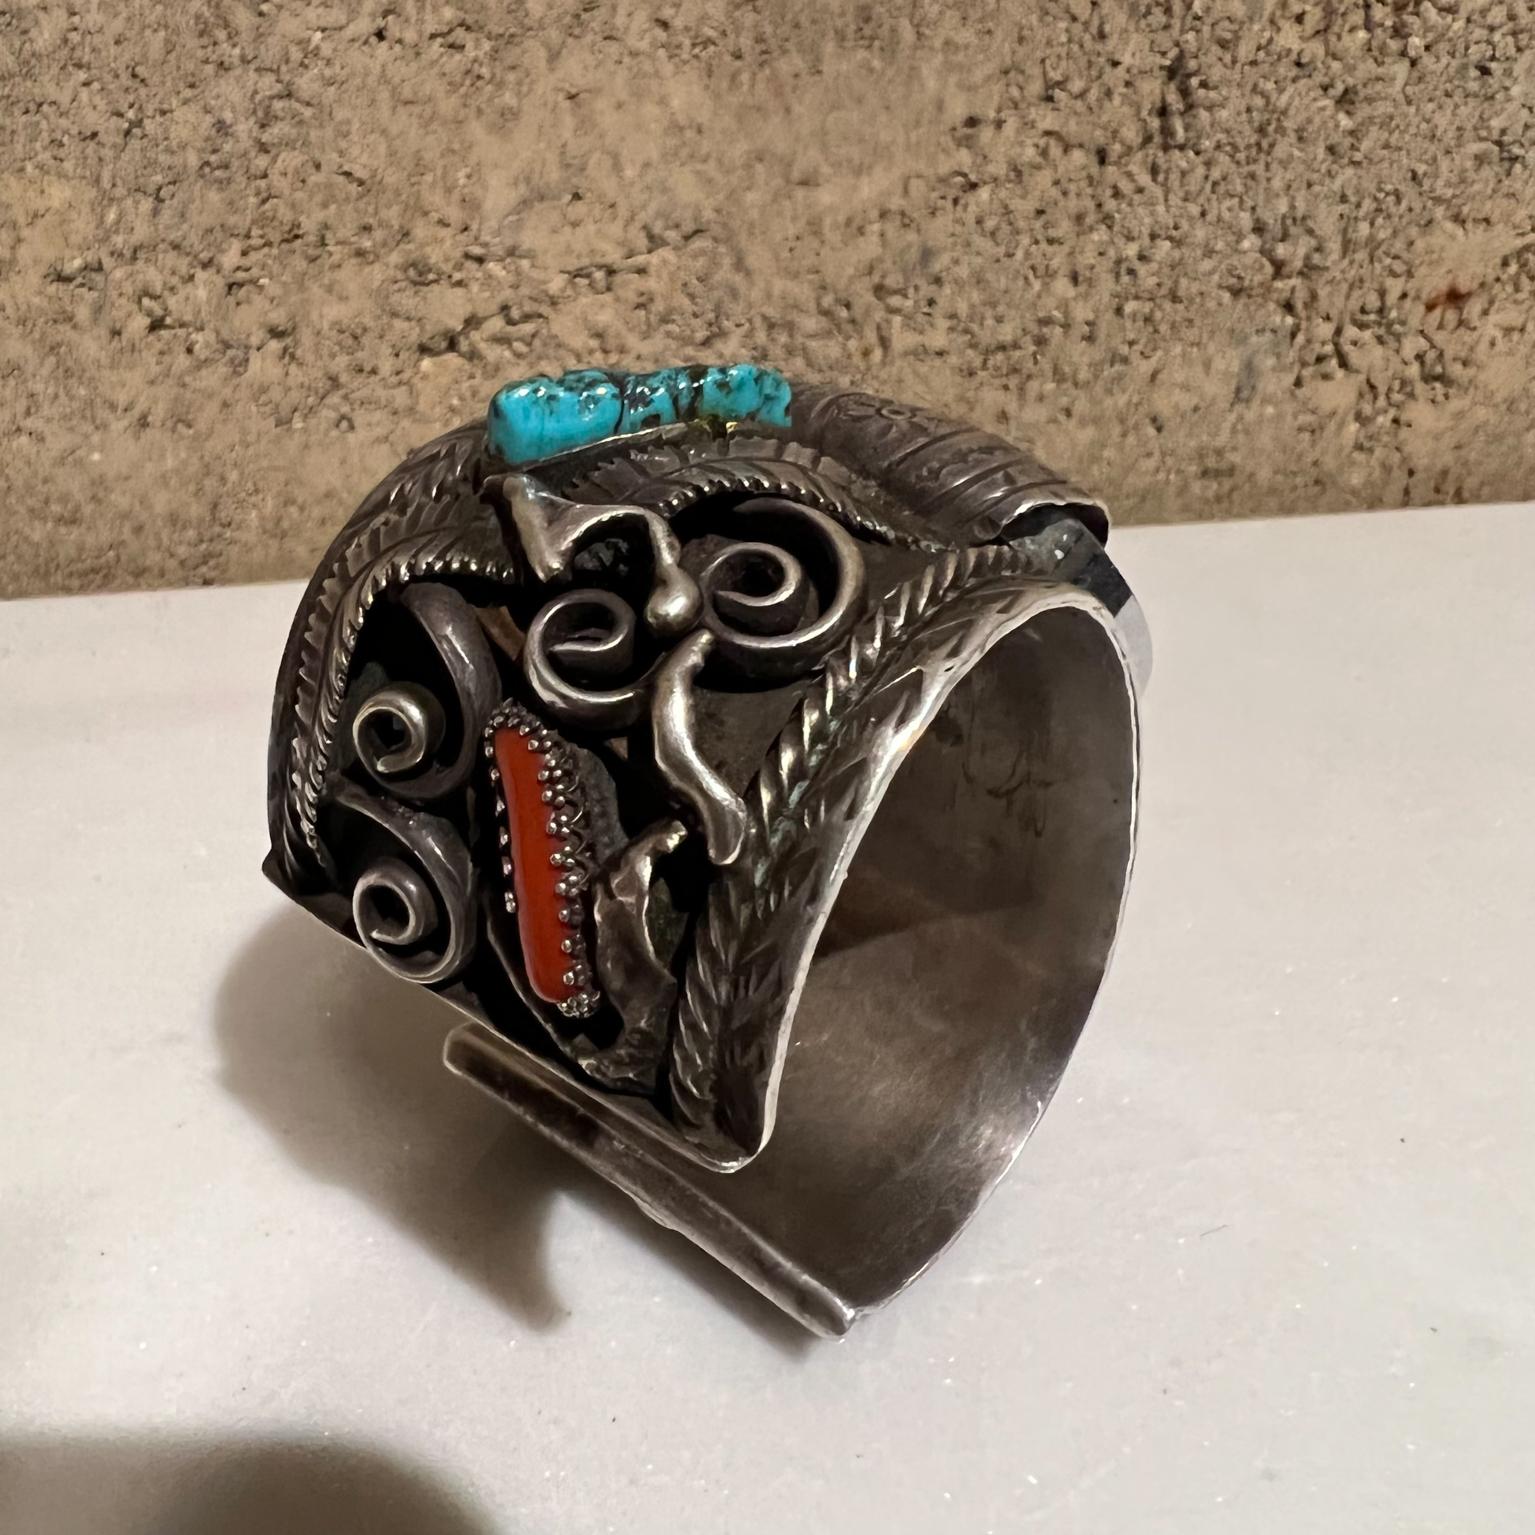 Late 20th Century 1970s Navajo Southwestern Silver and Stone Decorative Cuff Bracelet Watch Band For Sale